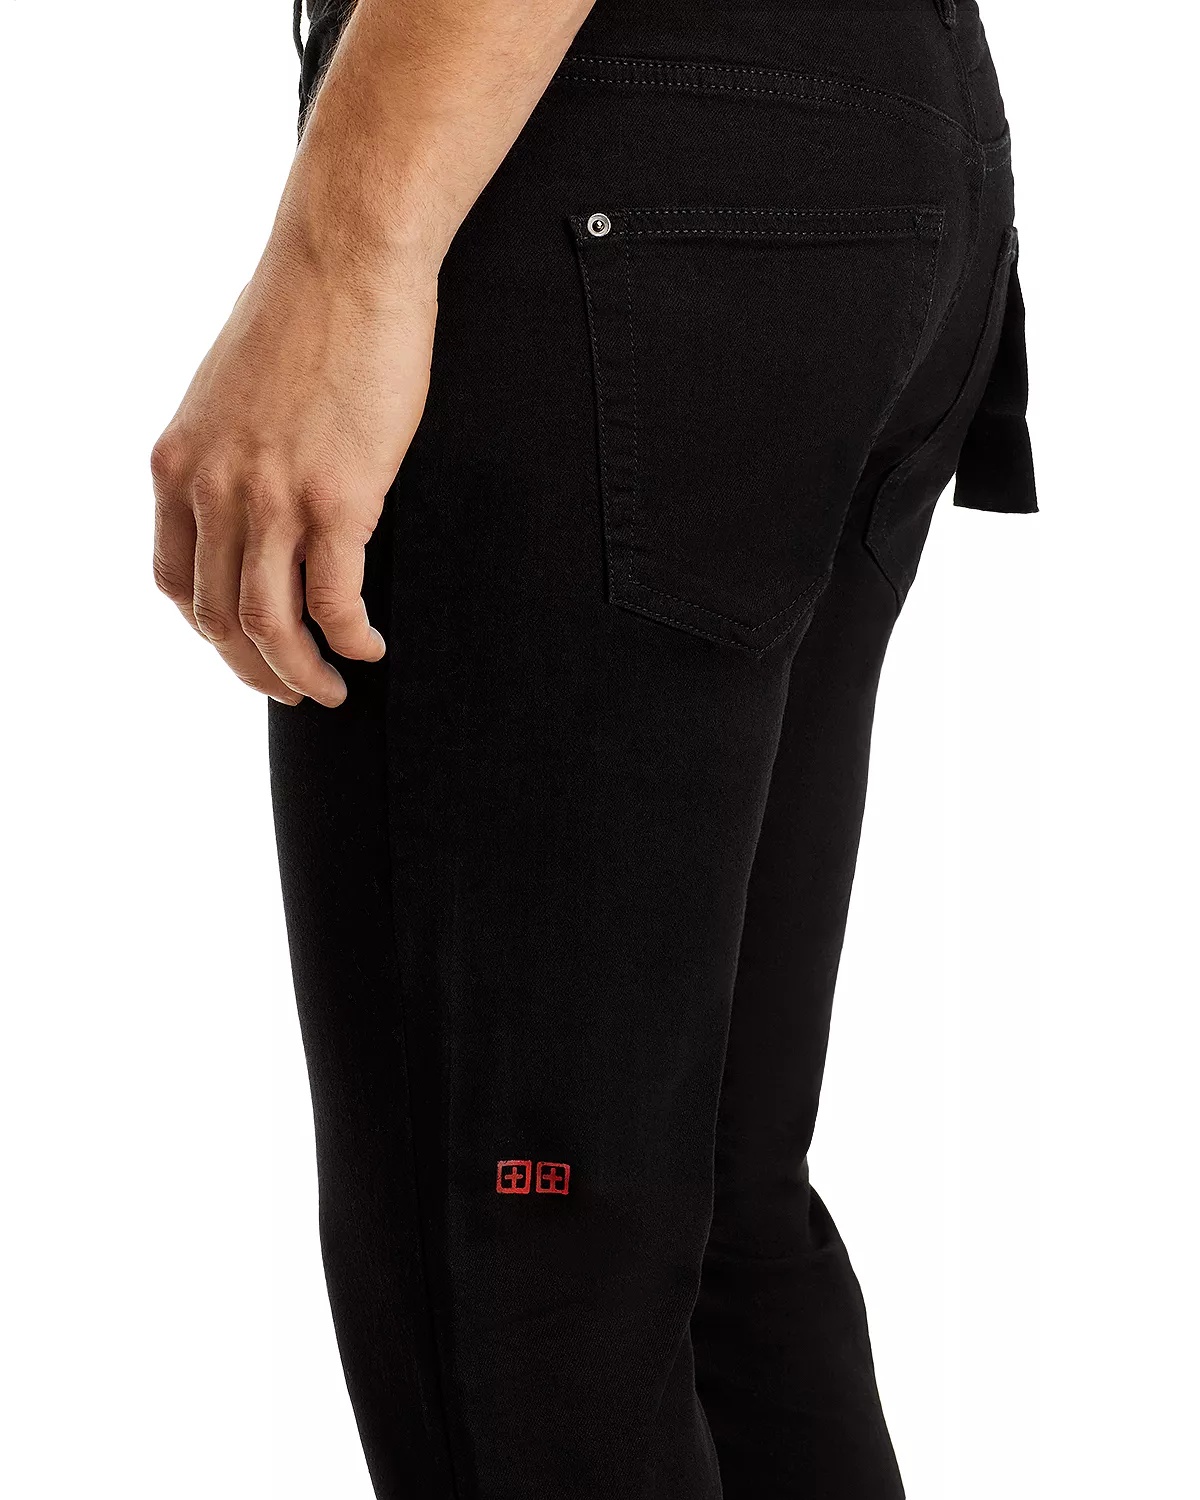 Chitch Slim Fit Jeans in Laid Black - 7